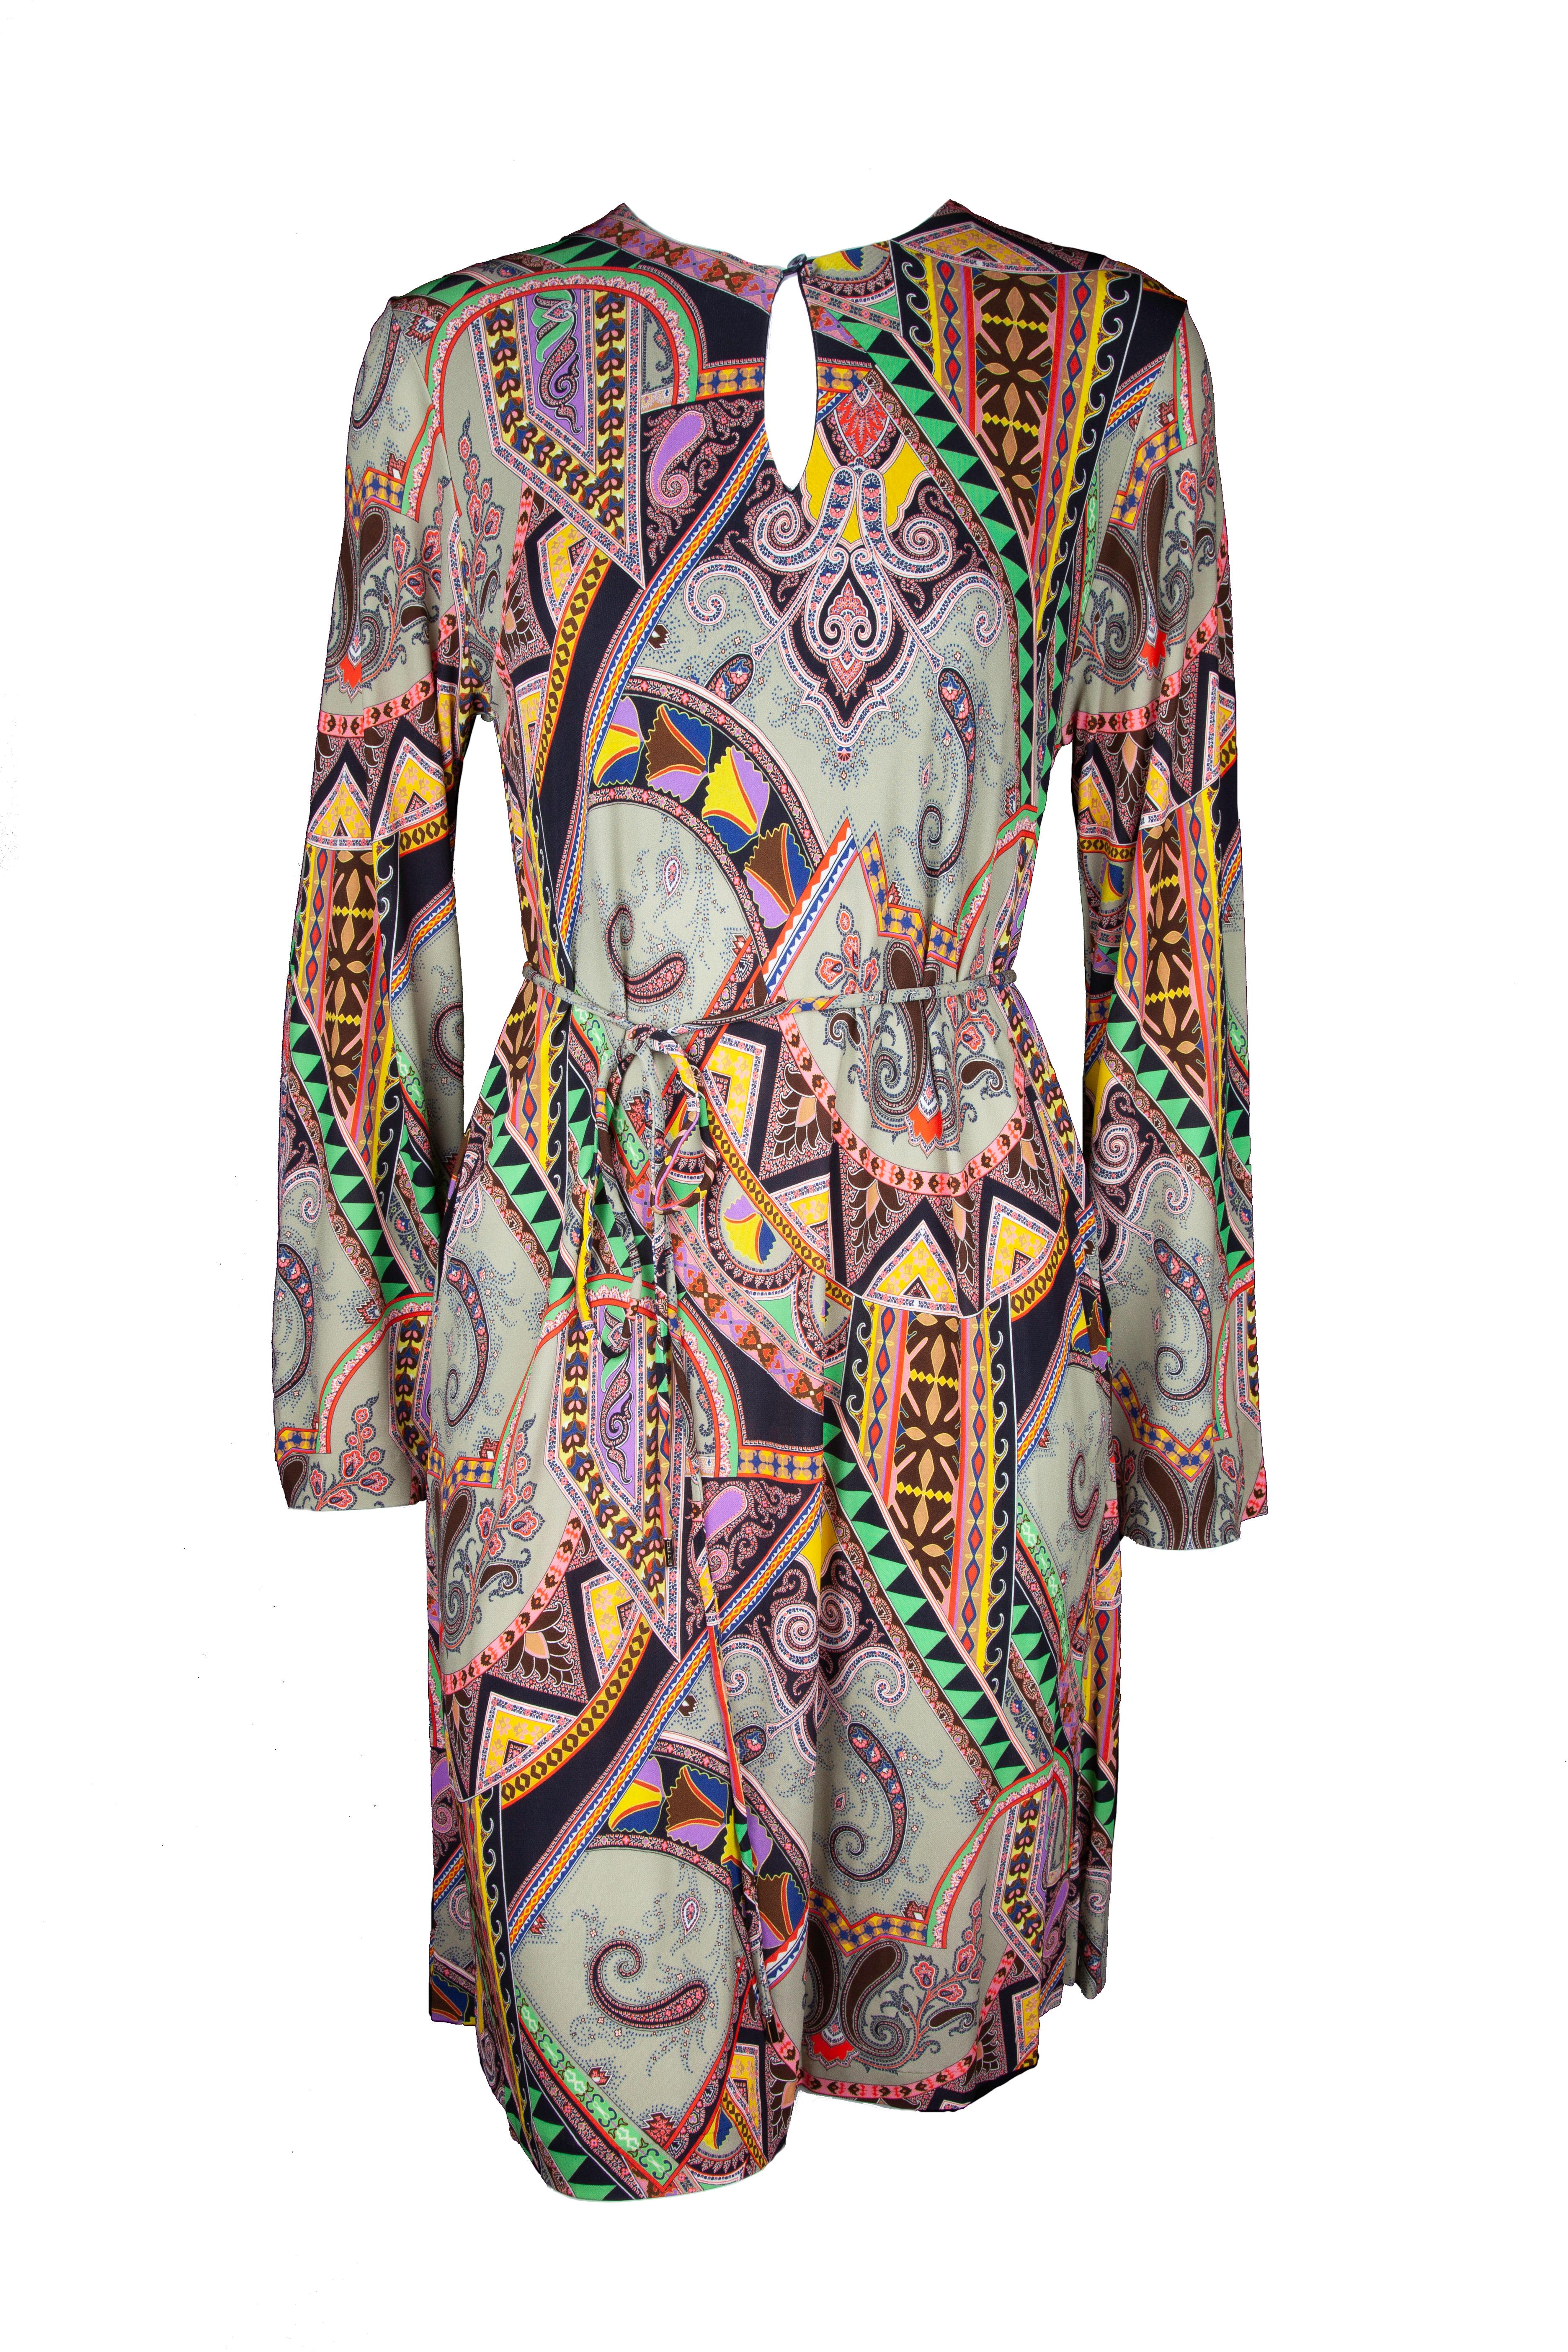 This Etro shift dress features an energetic paisley print, a button keyhole neckline, long sleeves, and a thin belt. With a stretchy and comfortable fabric, this dress is a great choice for most occasions. Brand new with tags. Made in Italy.

Size: